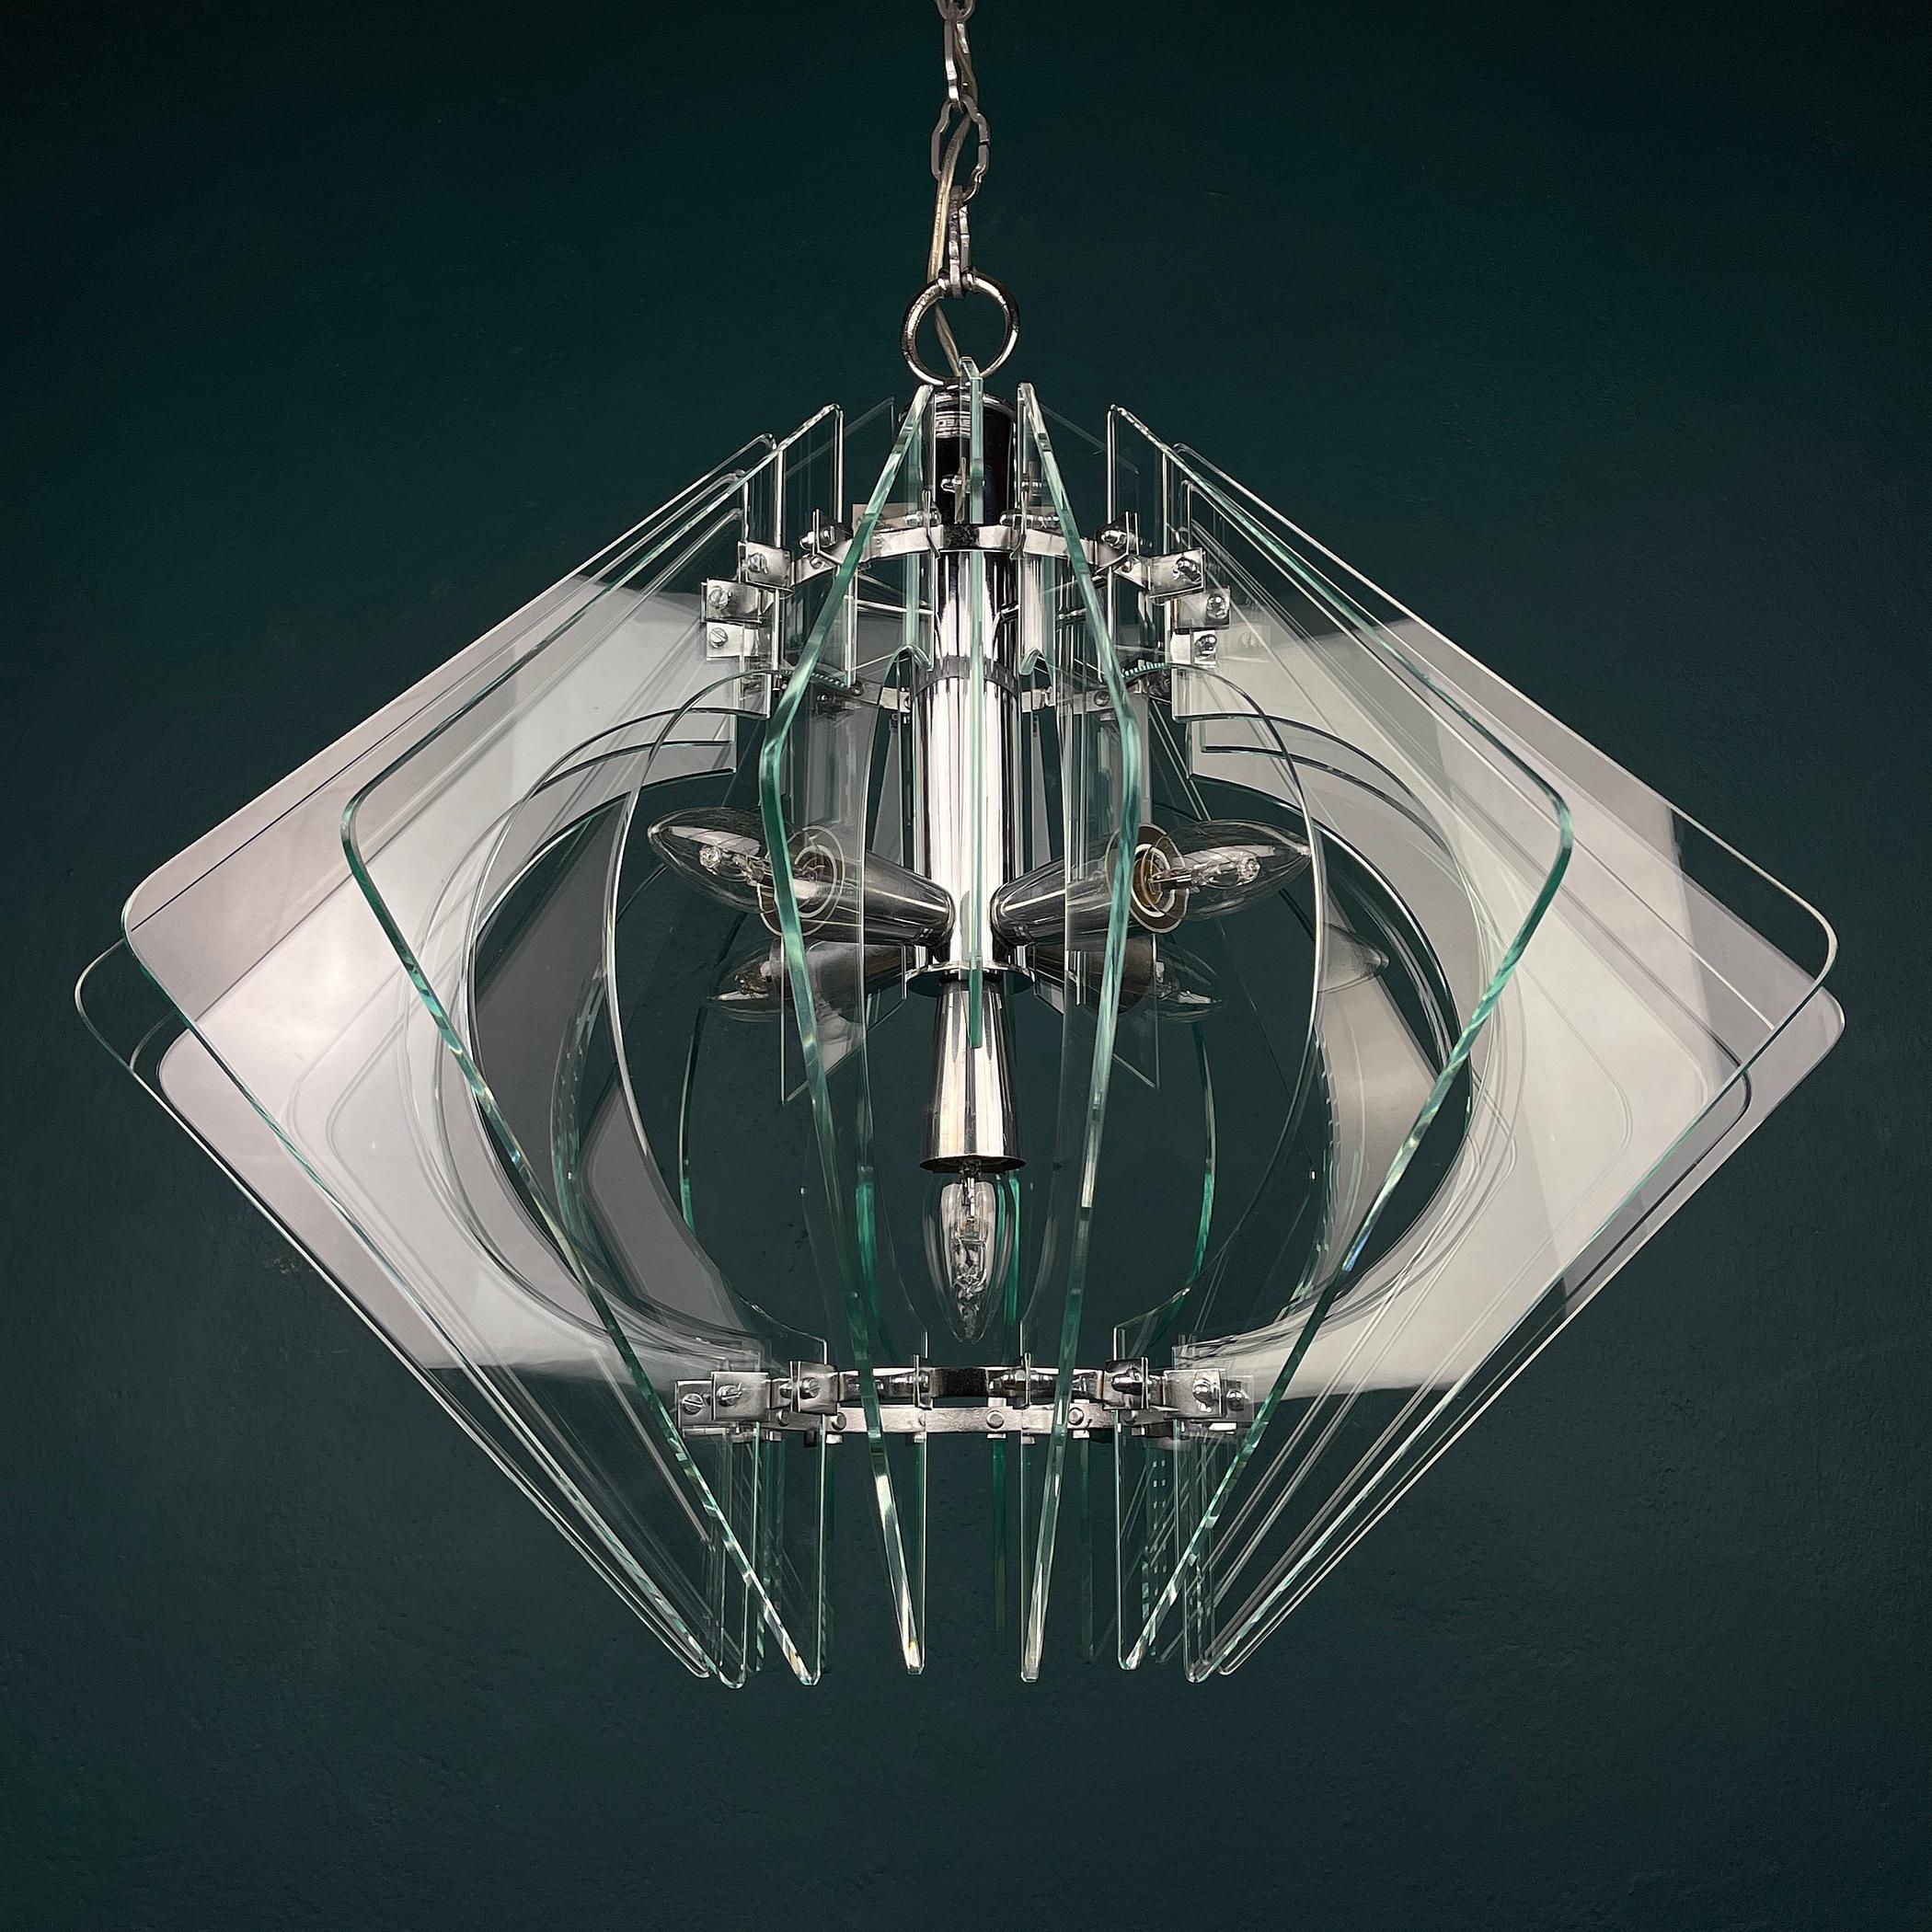 The beautiful Art glass chandelier by Veca made in Italy in the 1970s. The unusual shape, beautiful art glass creates a beautiful and effective light. Beautiful pale glass pieces have been shaped and highly polished with beveled ends to catch the